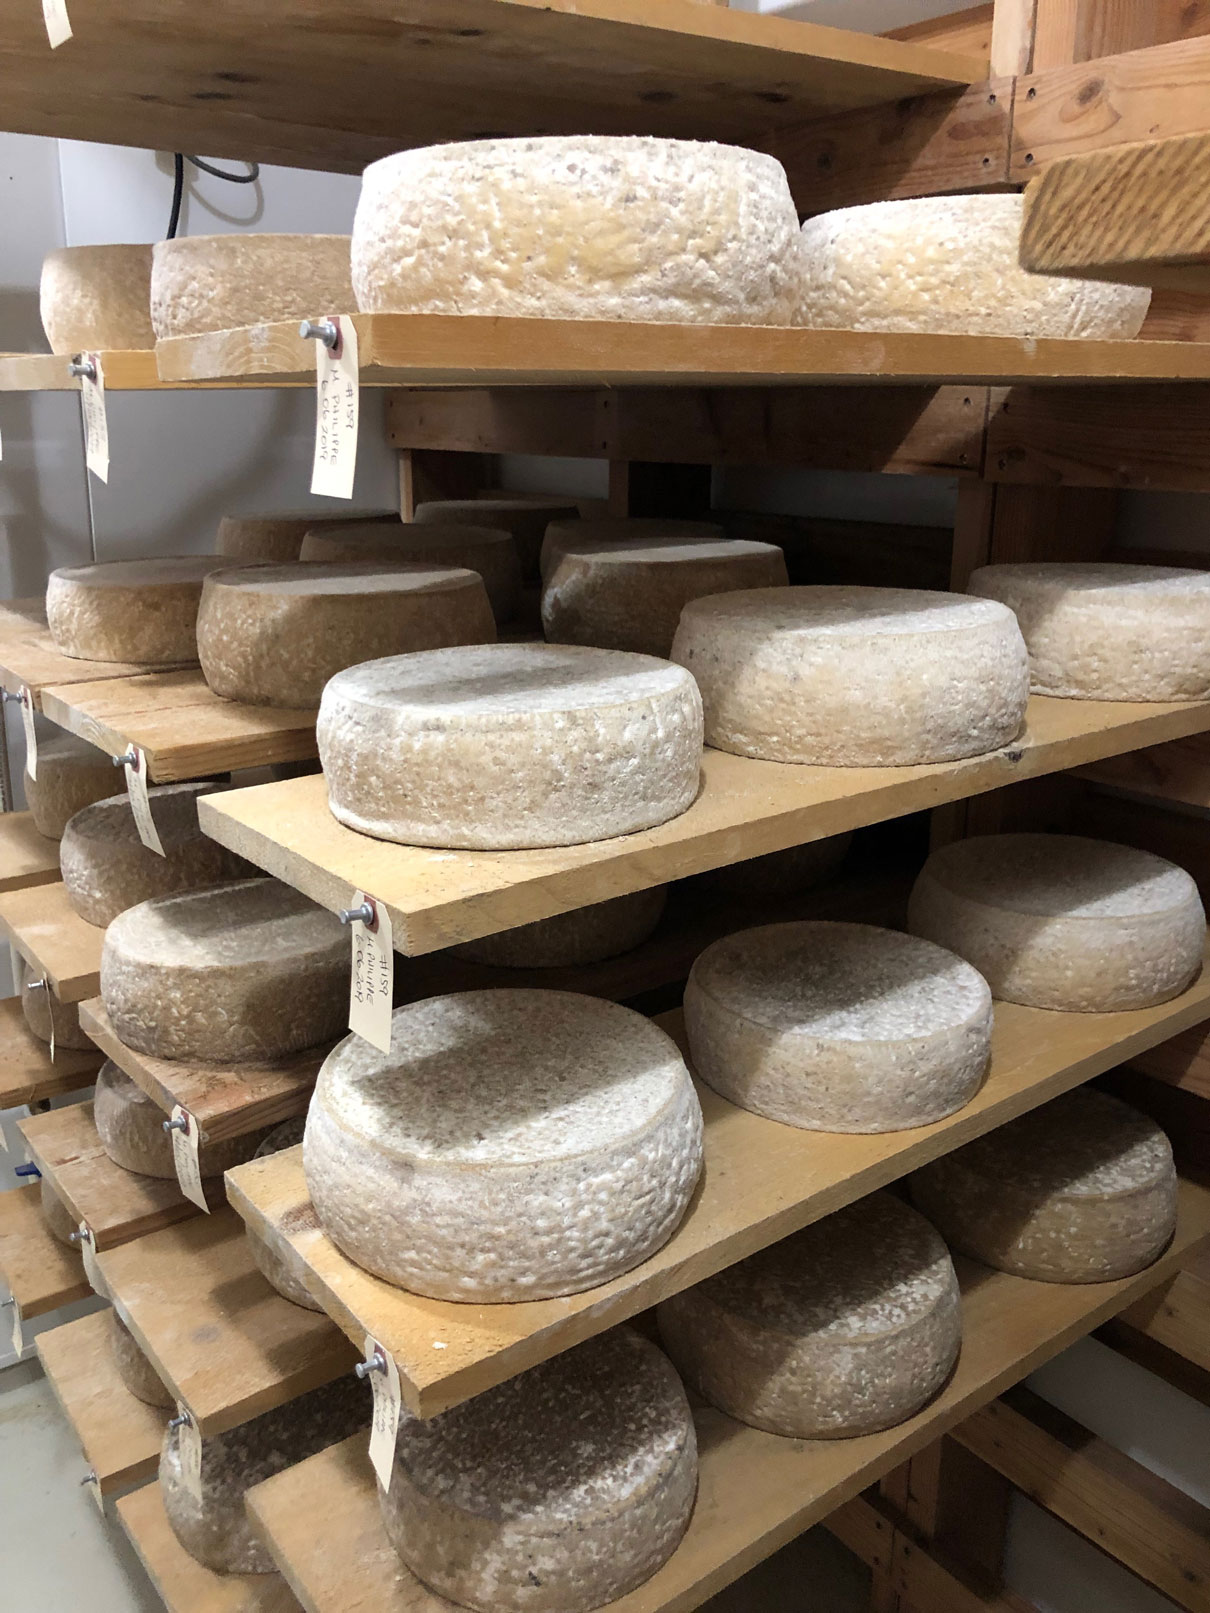 Pazzo Marco cheese aging on shelves